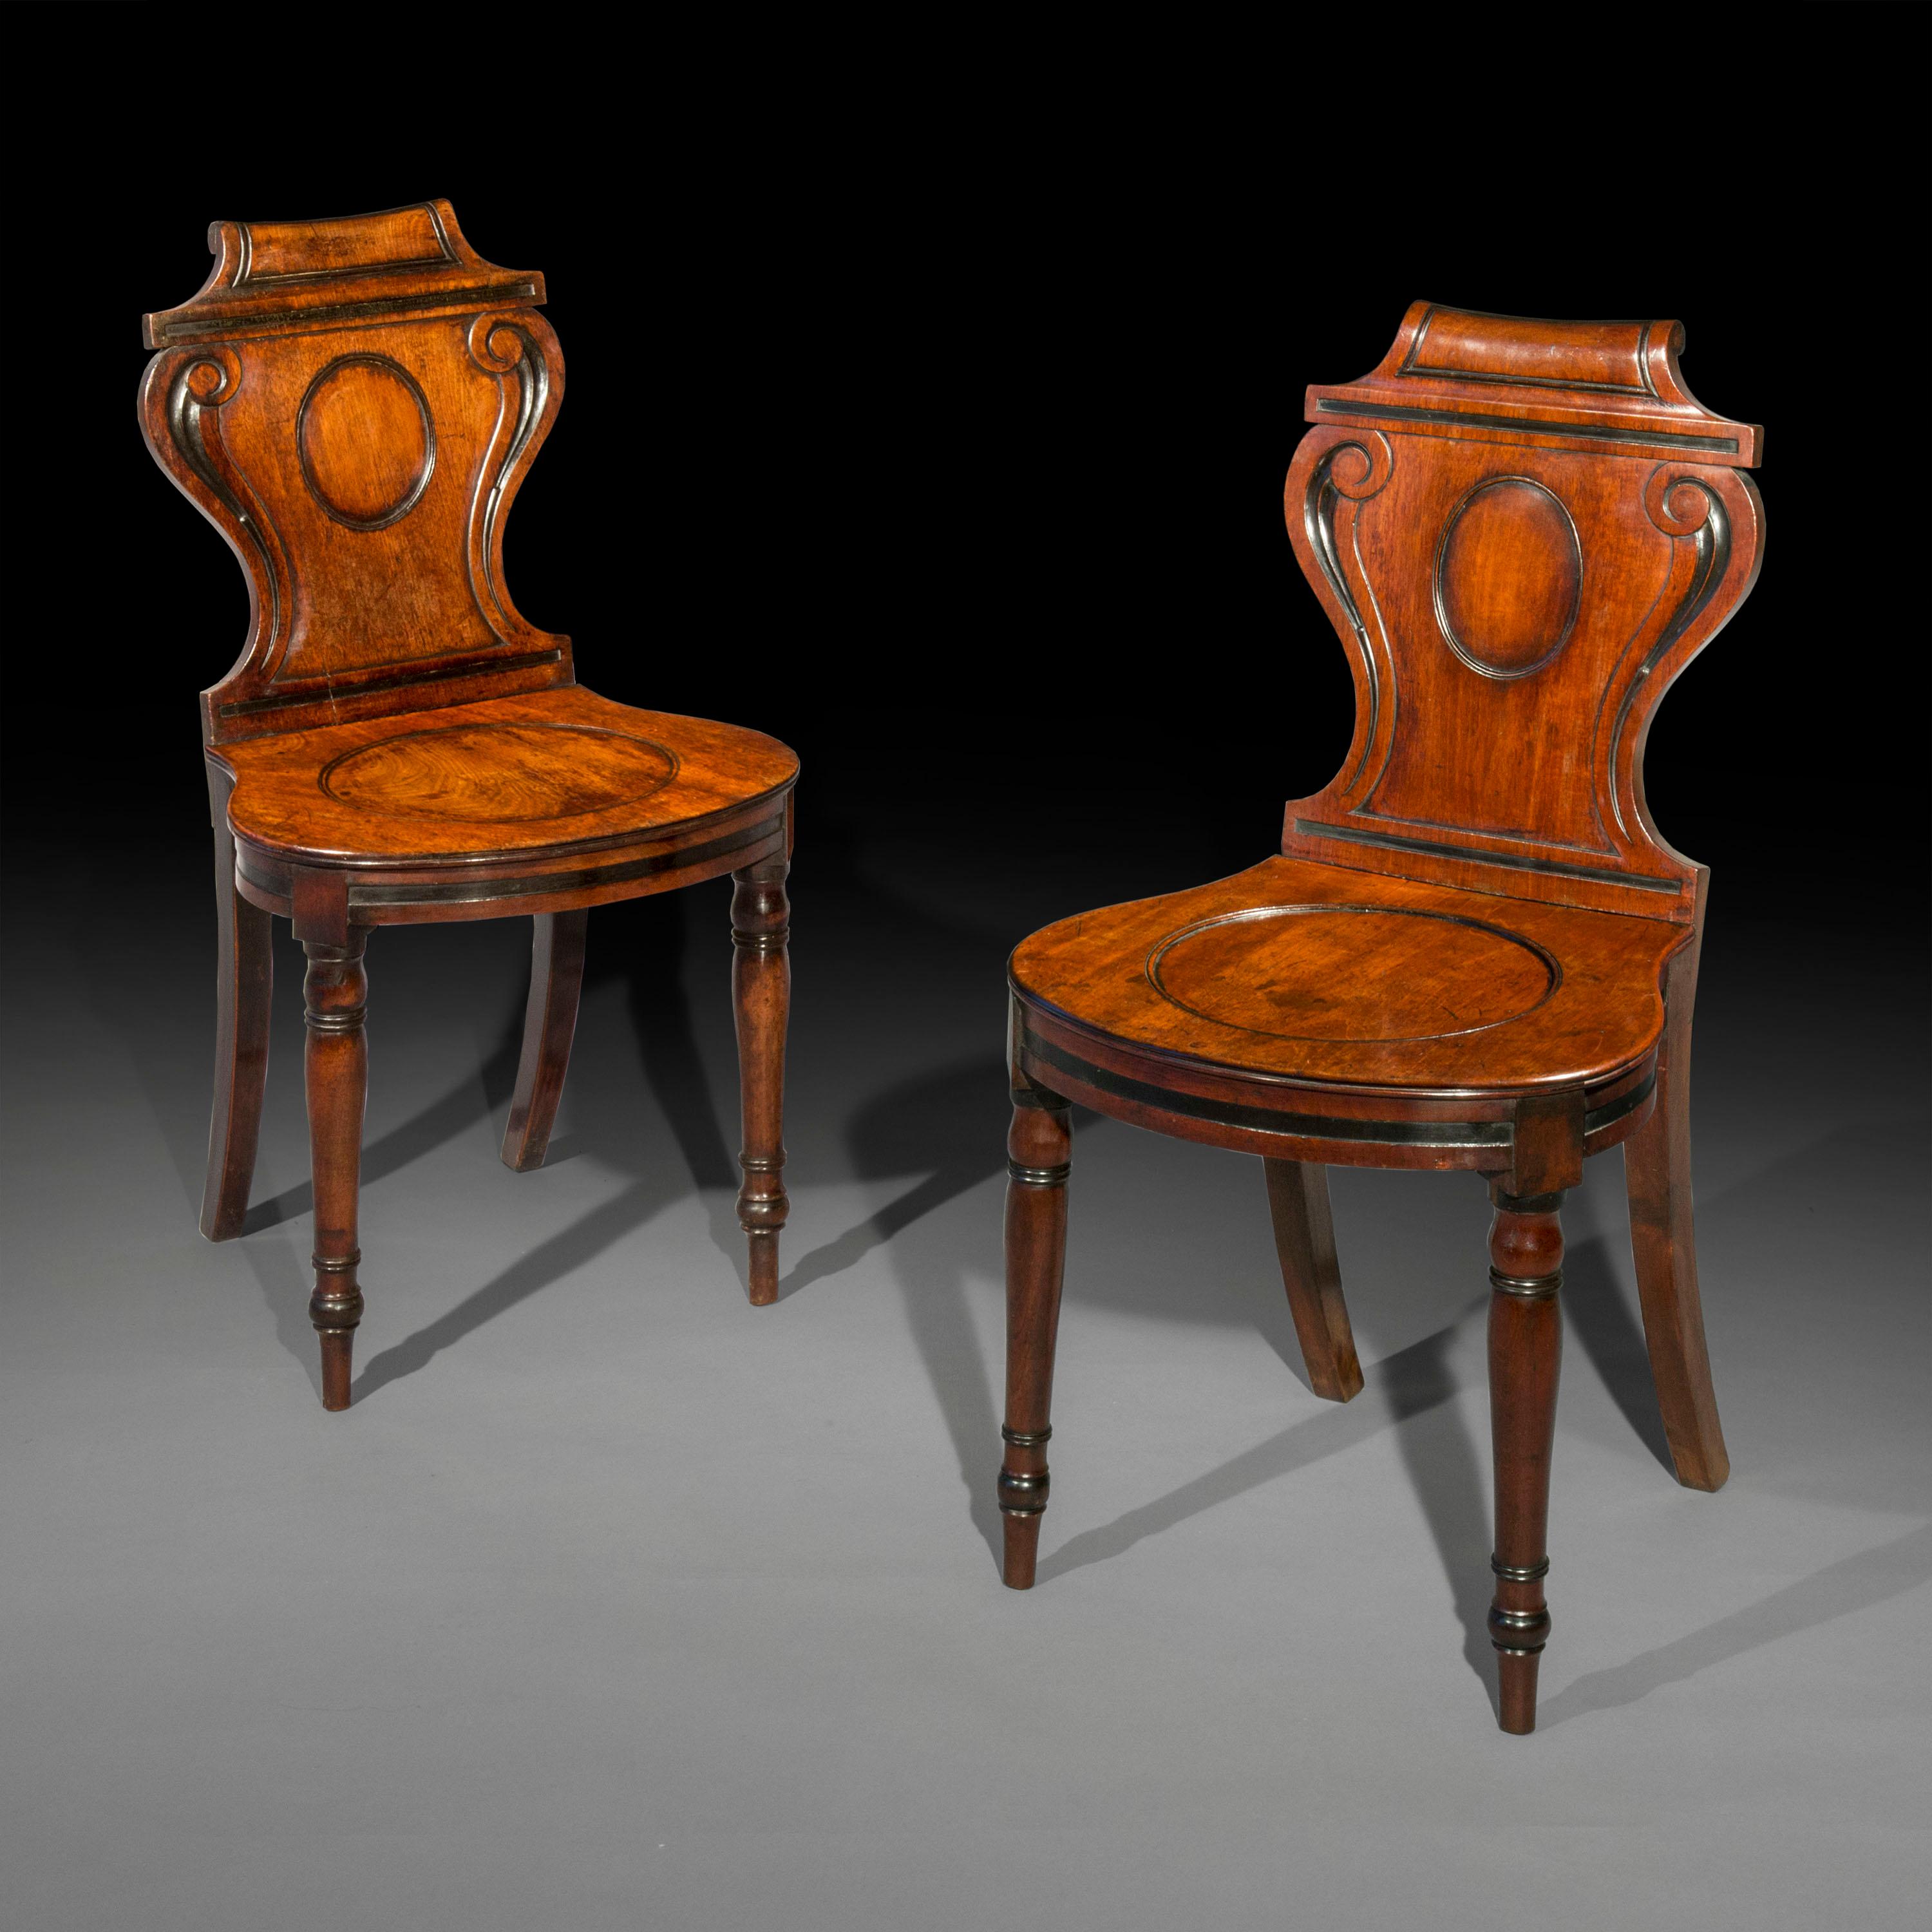 A fine pair of mahogany hall chairs of the Regency period, attributed to Thomas Banting and William France.
England, circa 1815.

Why we like them
These fine hall chairs have a particularly elegant and sophisticated scrolled cartouche design of